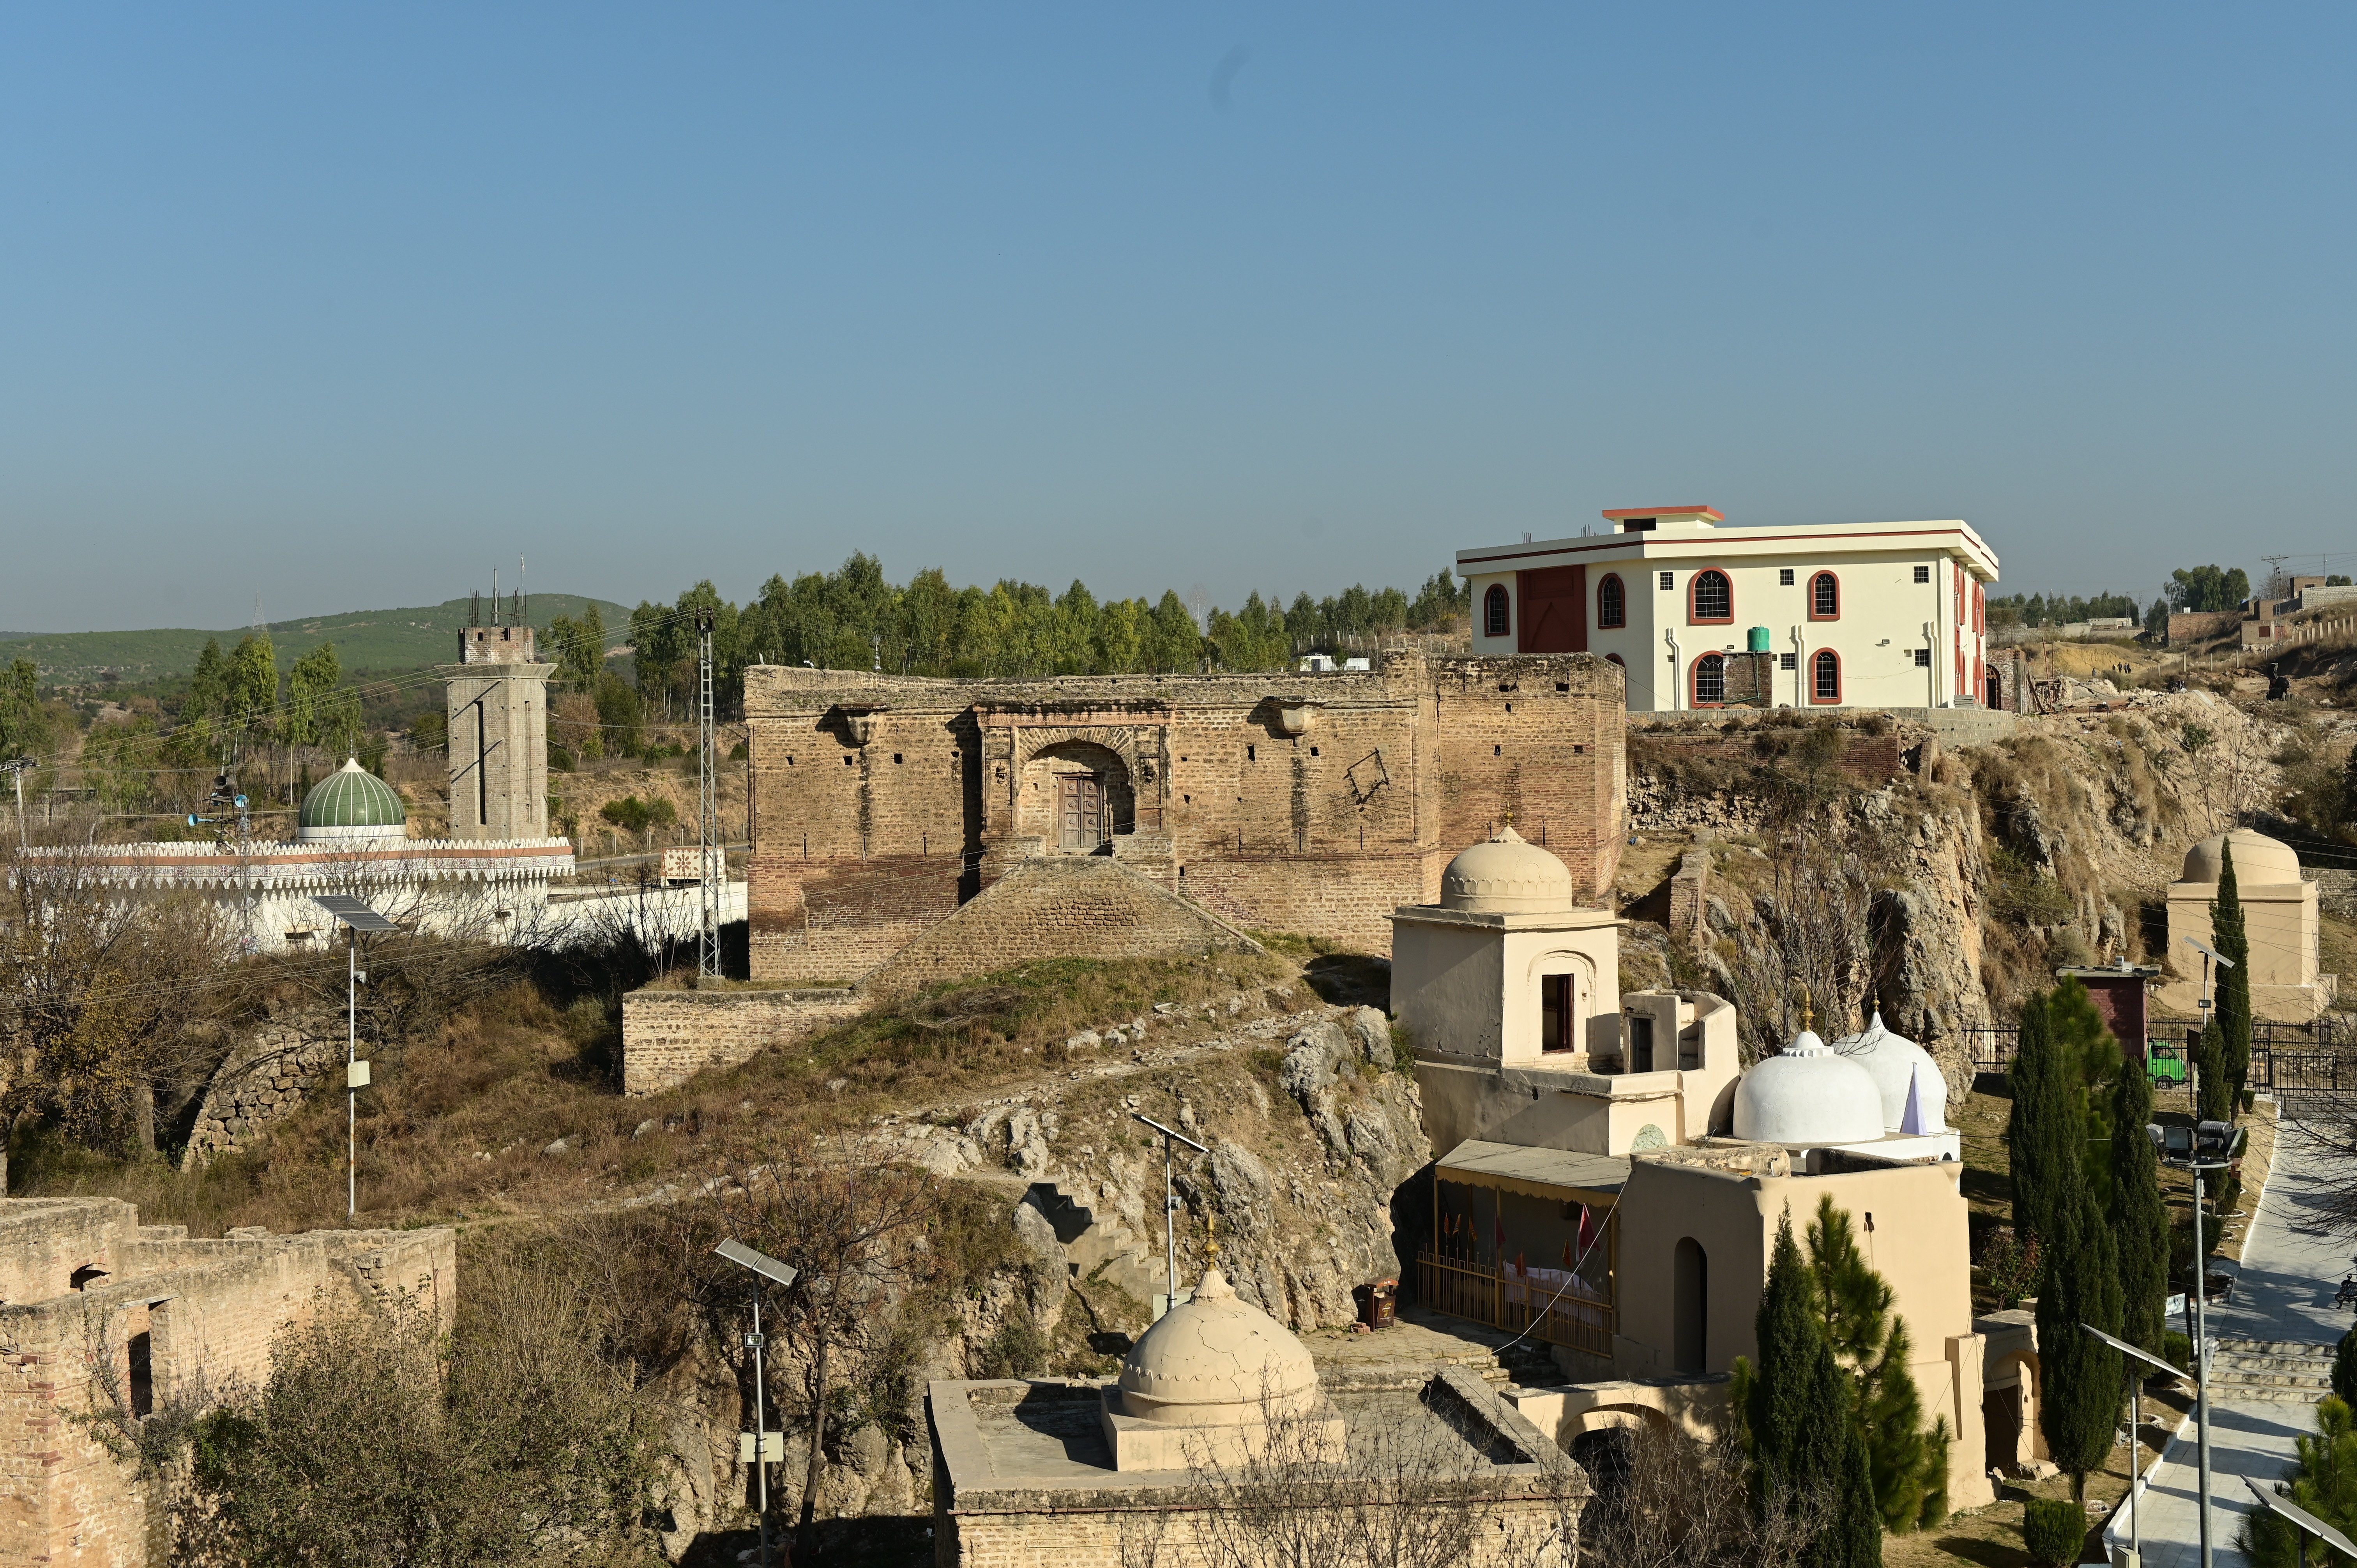 The arial view of Katas Raj a complex of several Hindu temples connected to one another by walkways